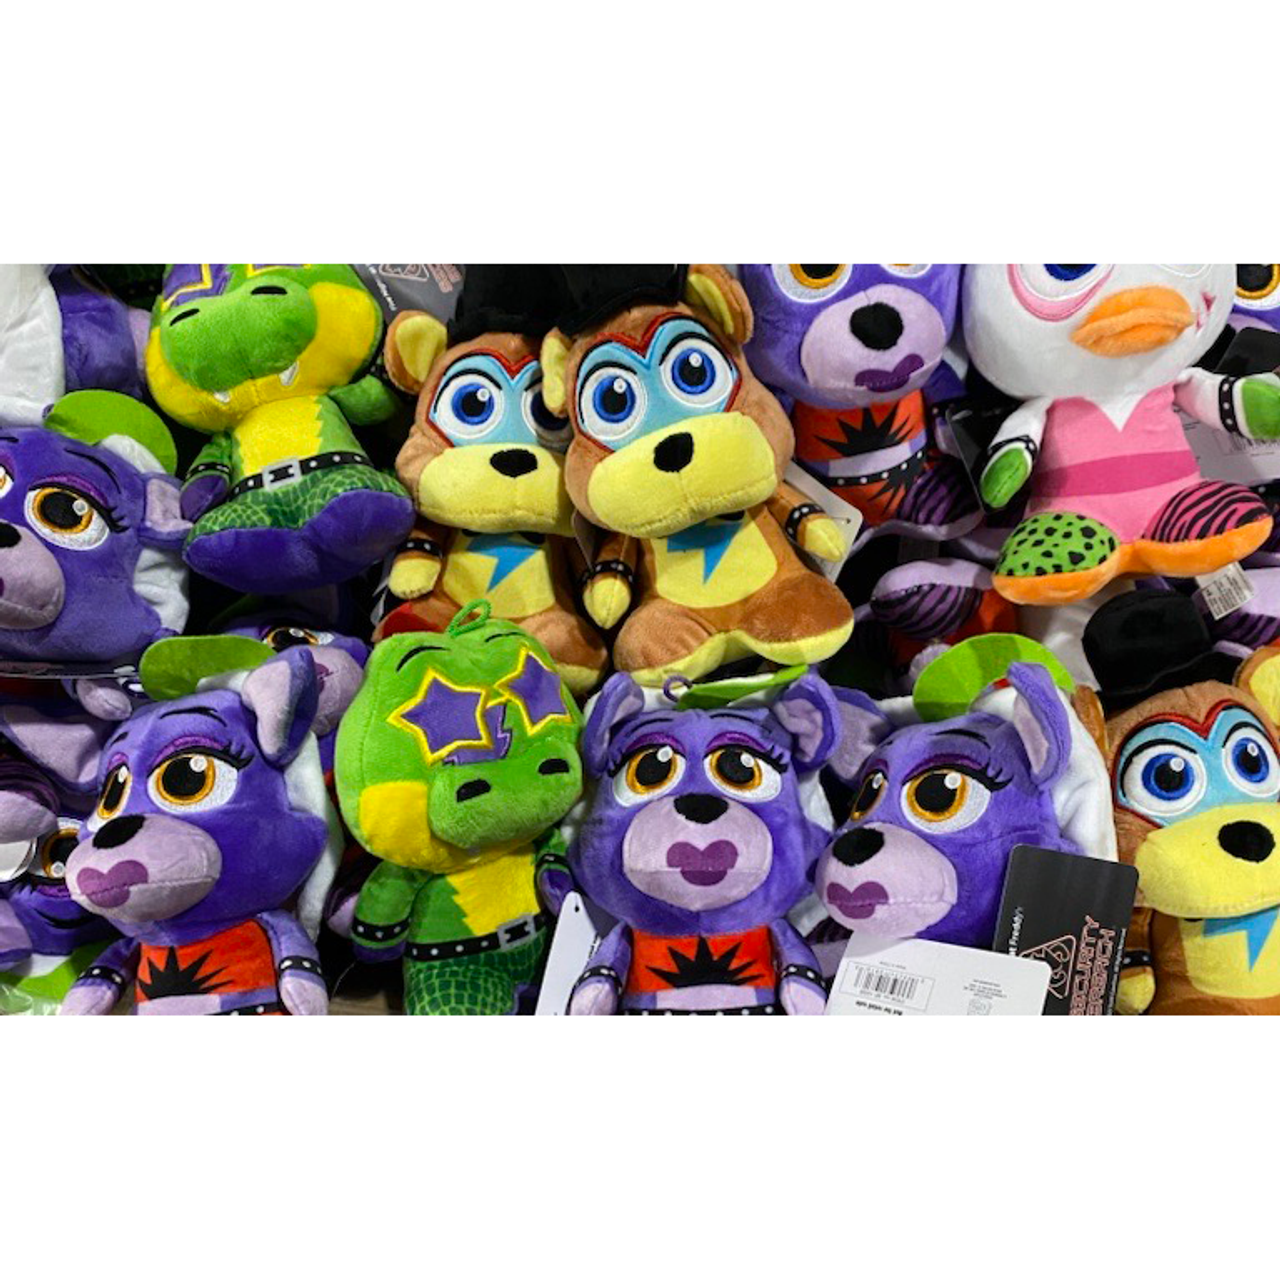 Fnaf Plushies - All Characters(7) - -- Five Nights Freddy's Plush